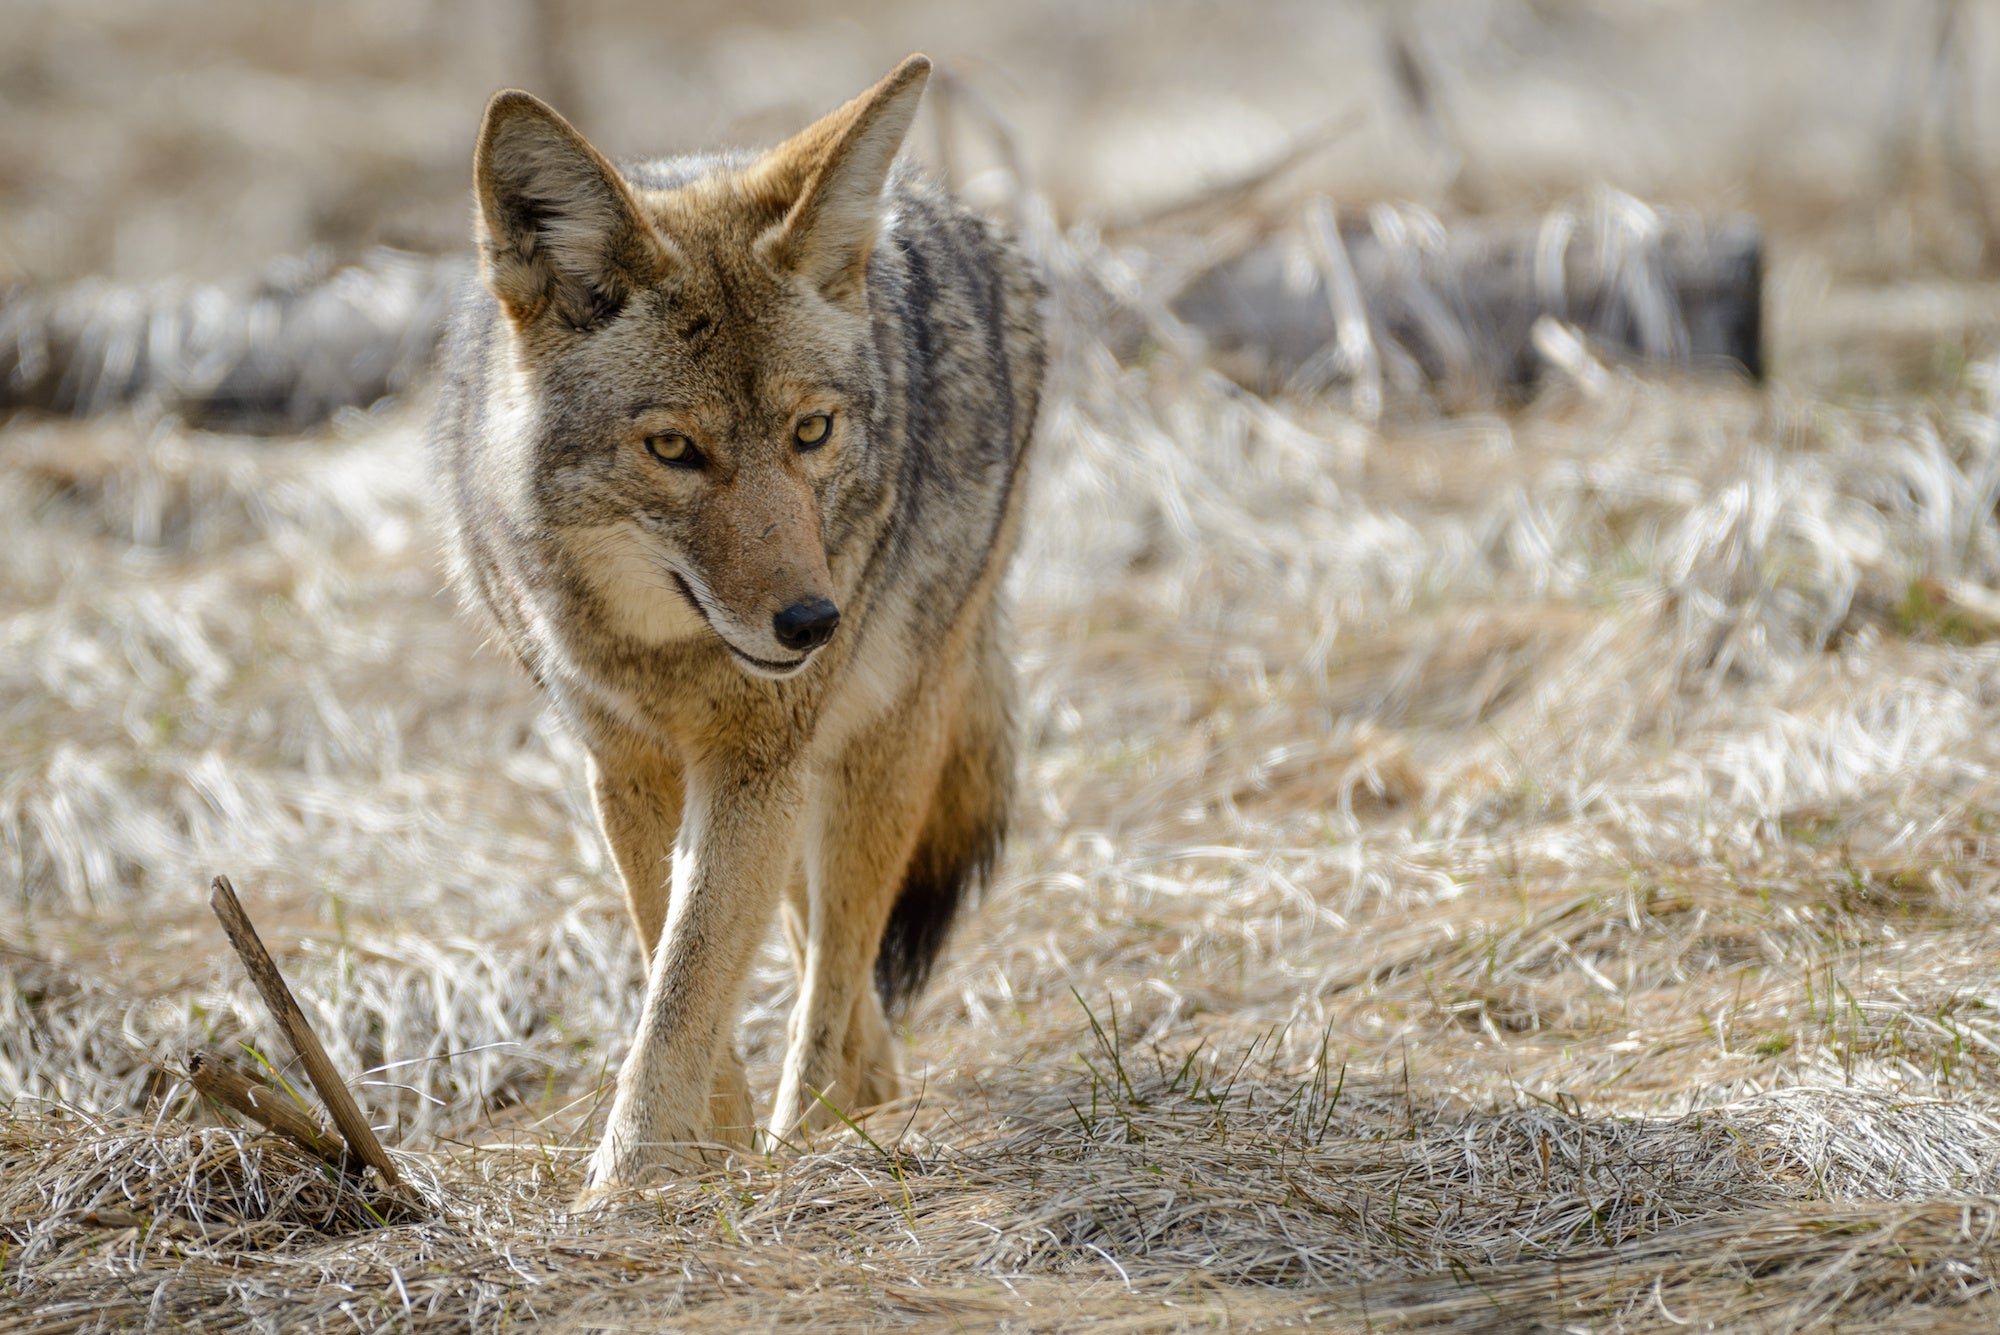 coyote walking in the brush.